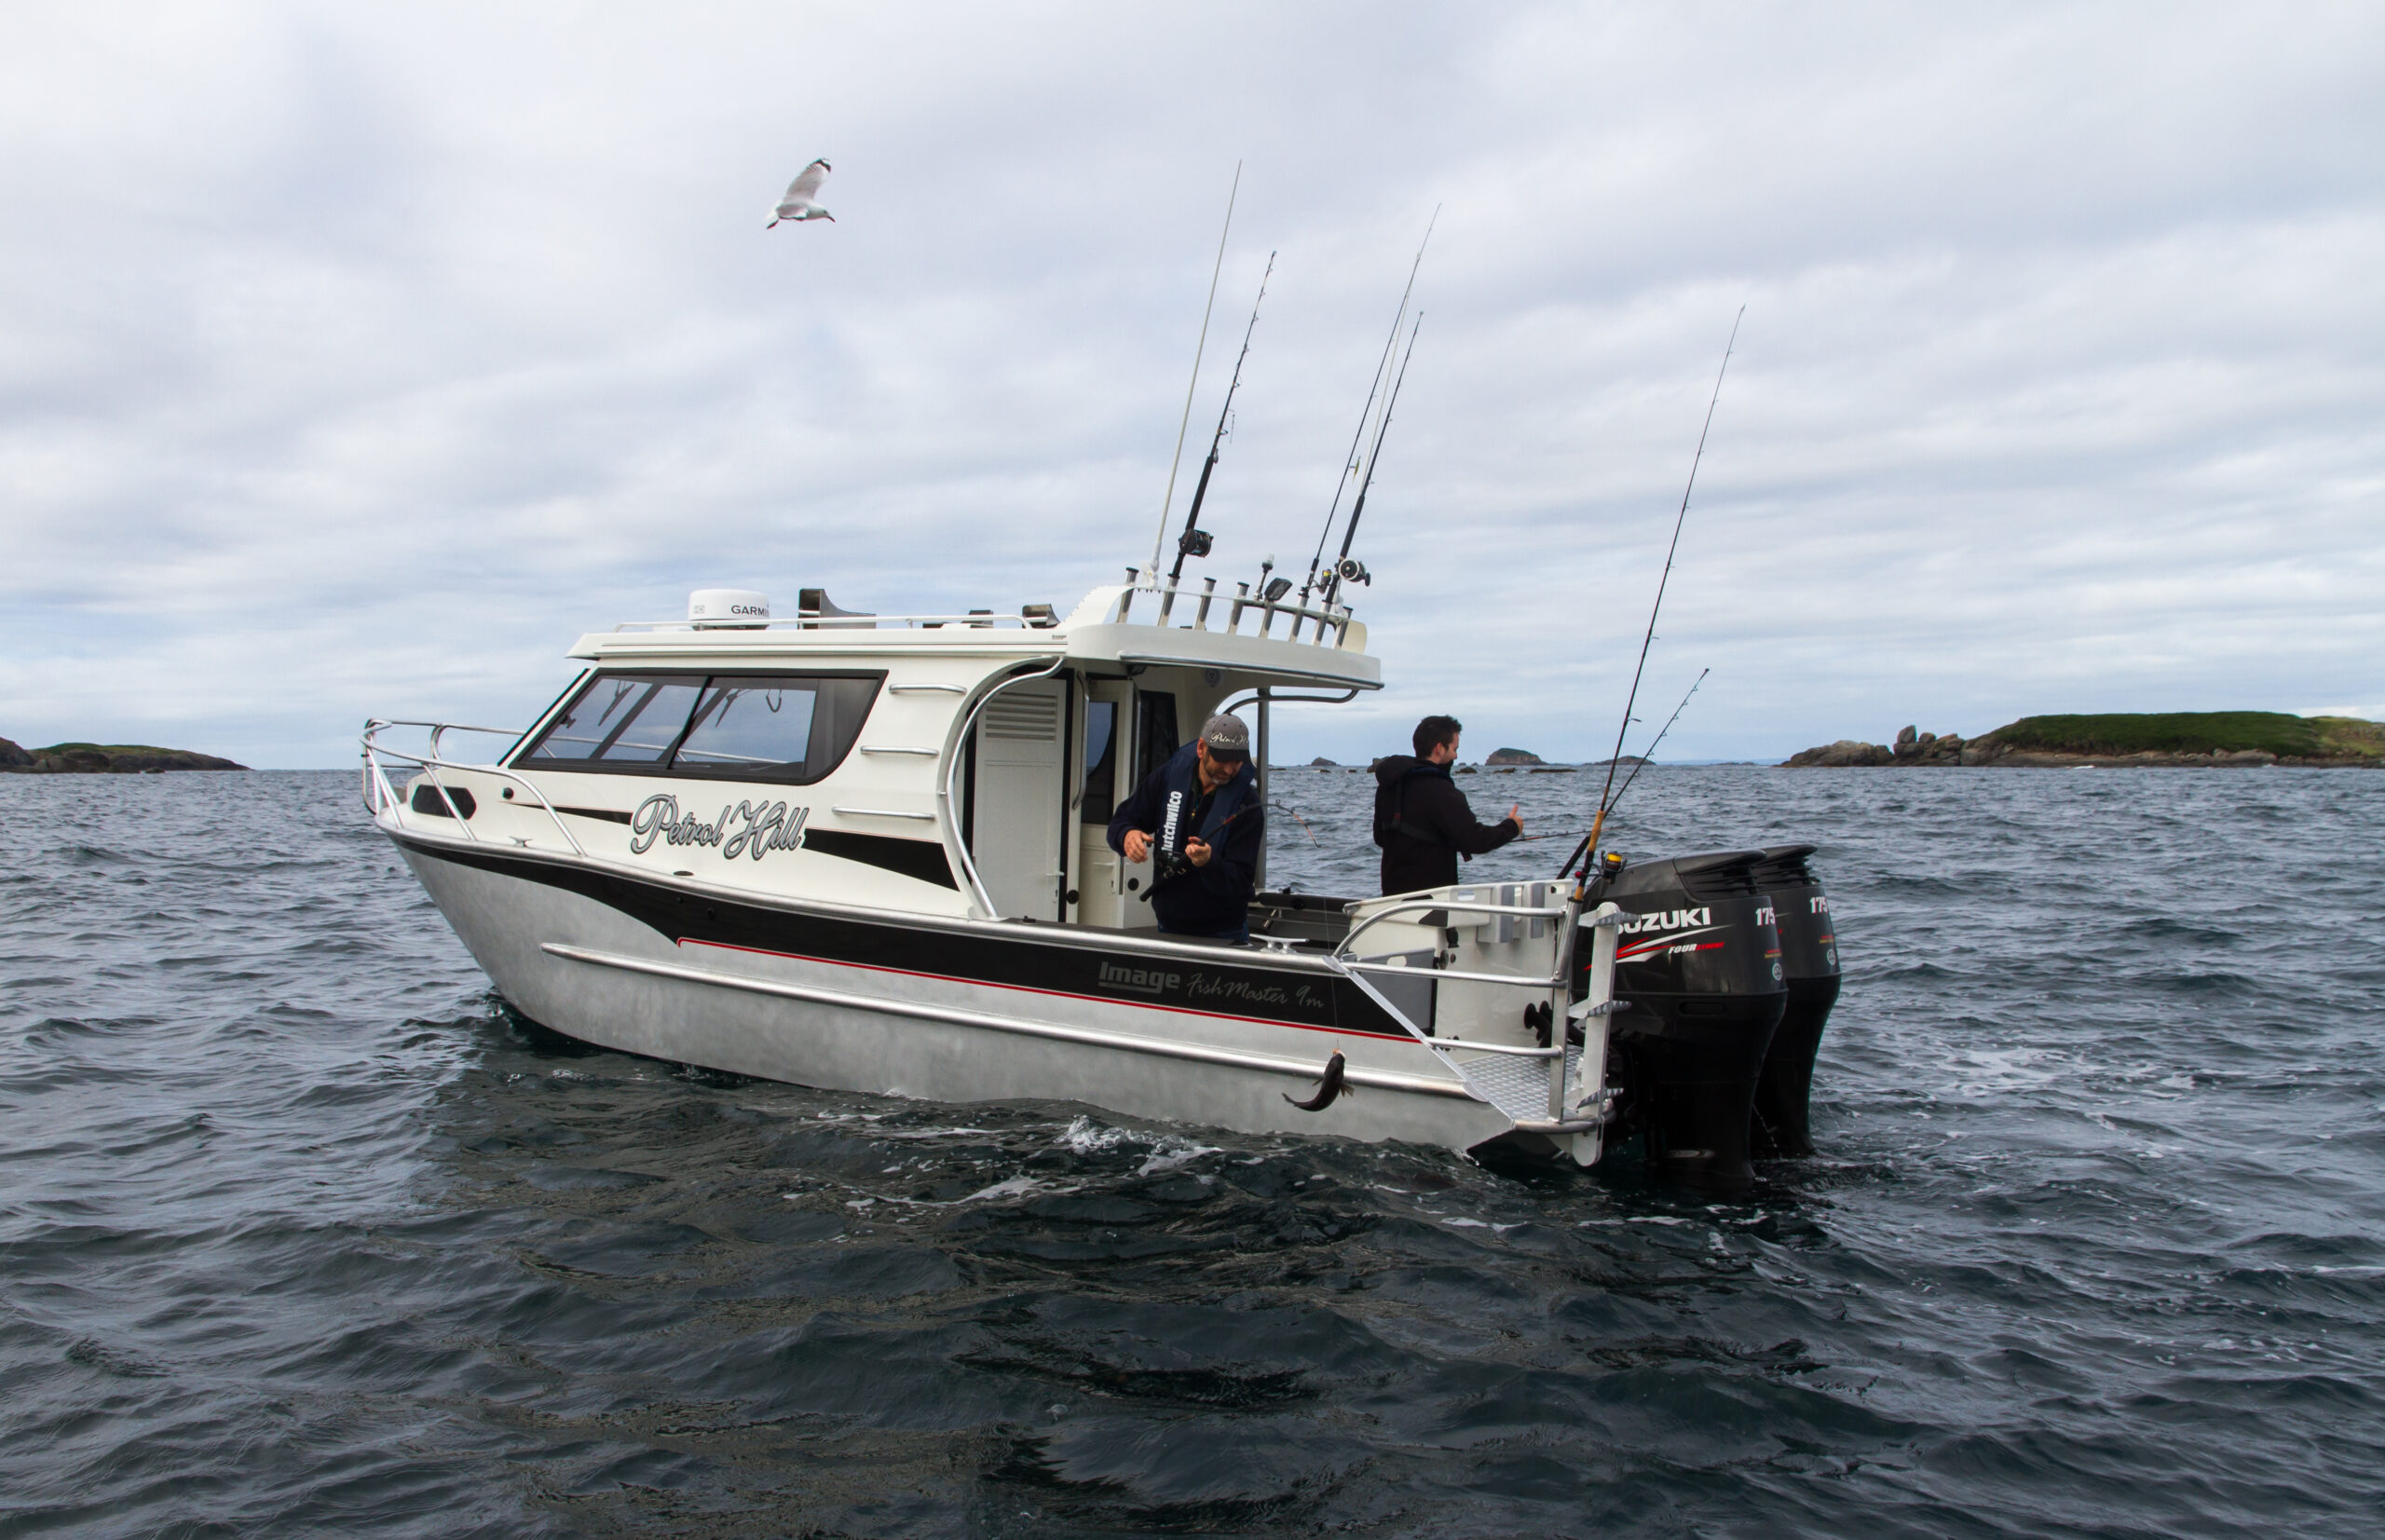 Image Boats NZ Fishmaster 9m with men fishing on it